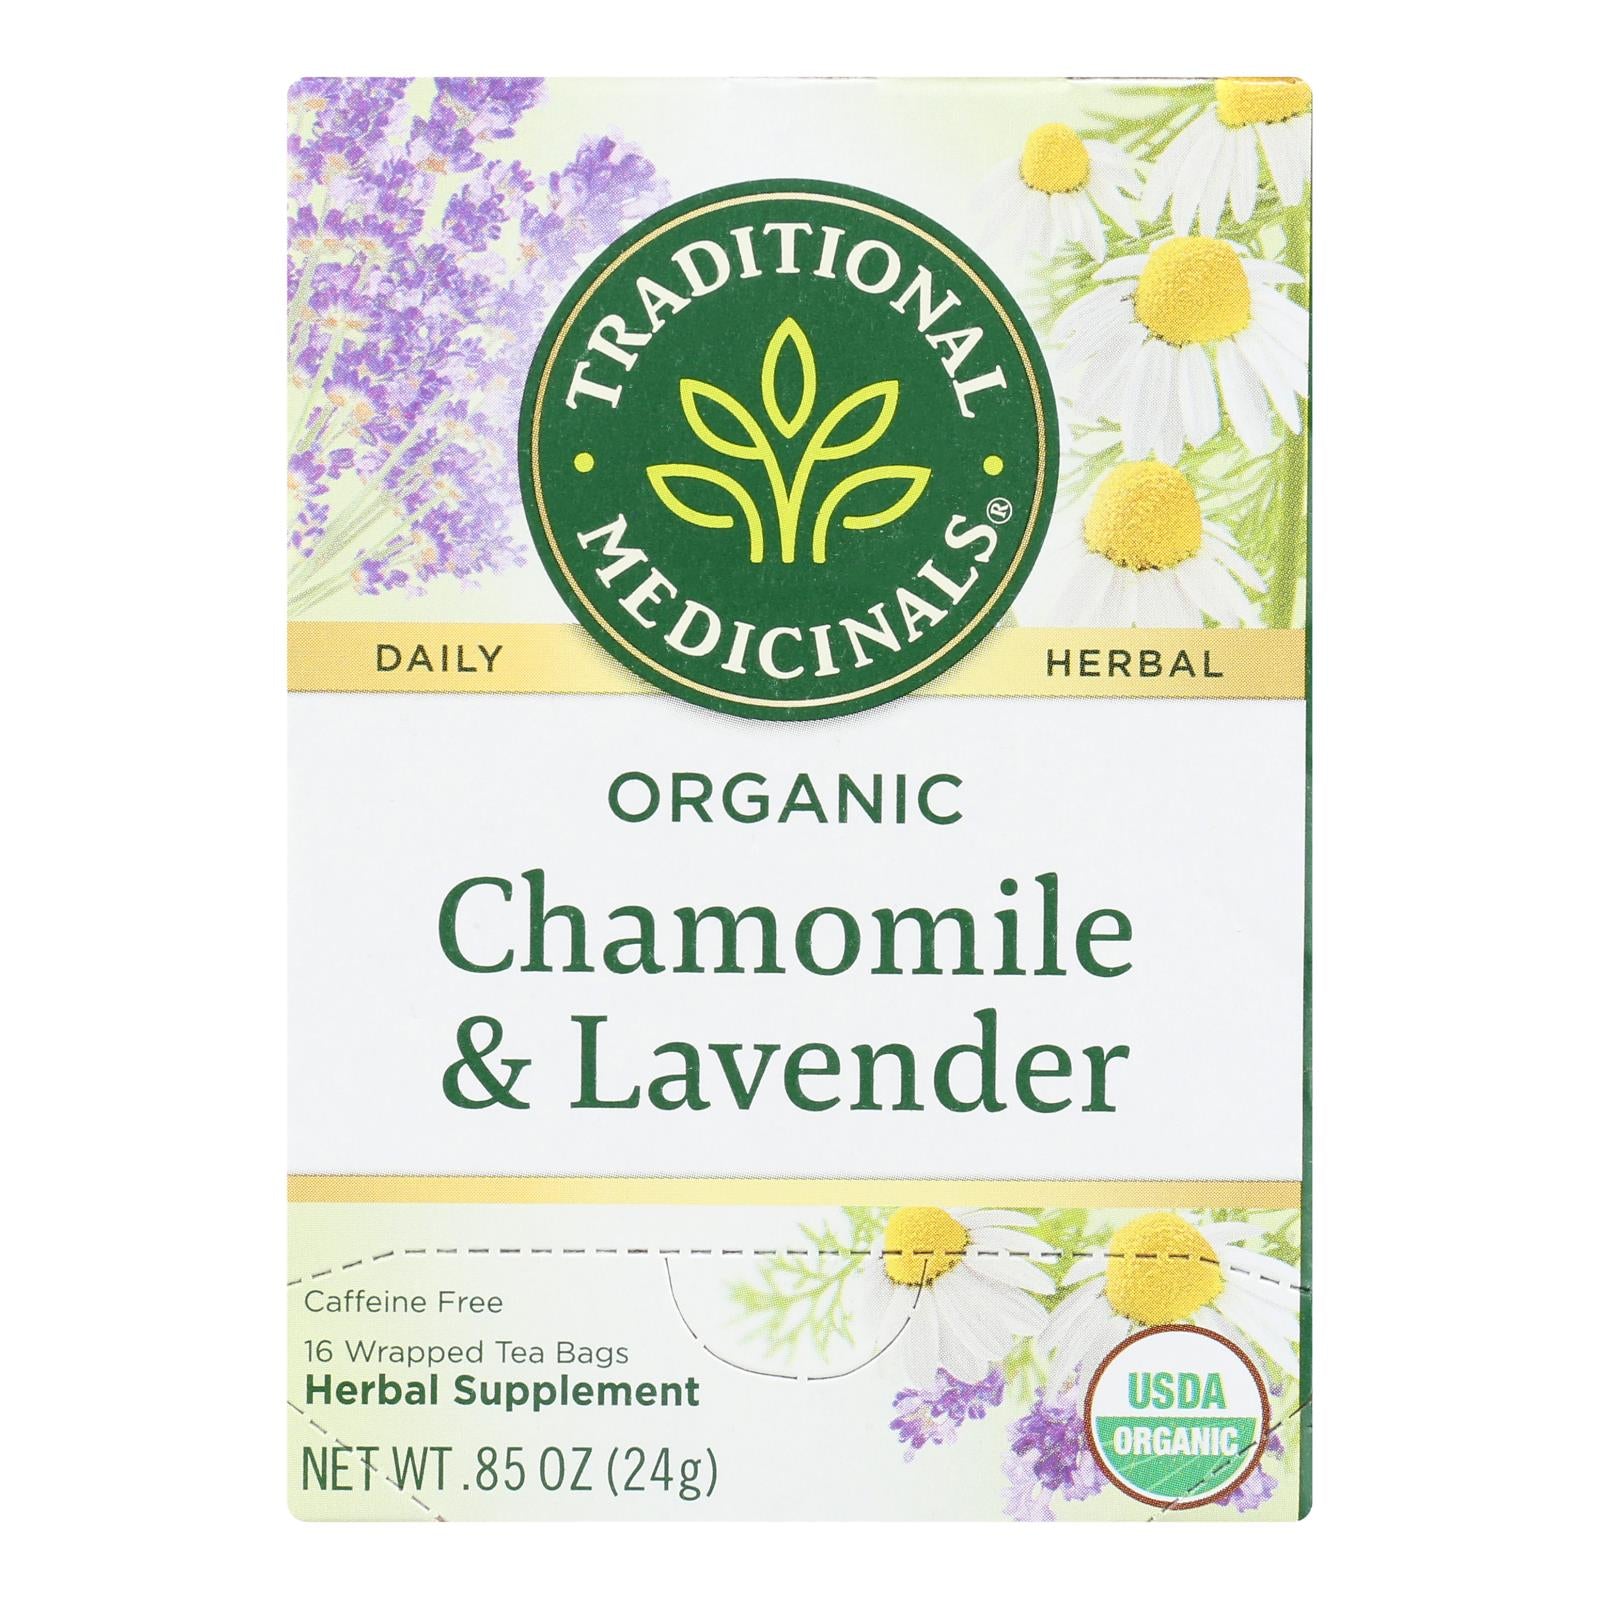 Traditional Medicinals Organic Chamomile With Lavender Herbal Tea - Caffeine Free - Case Of 6 - 16 Bags